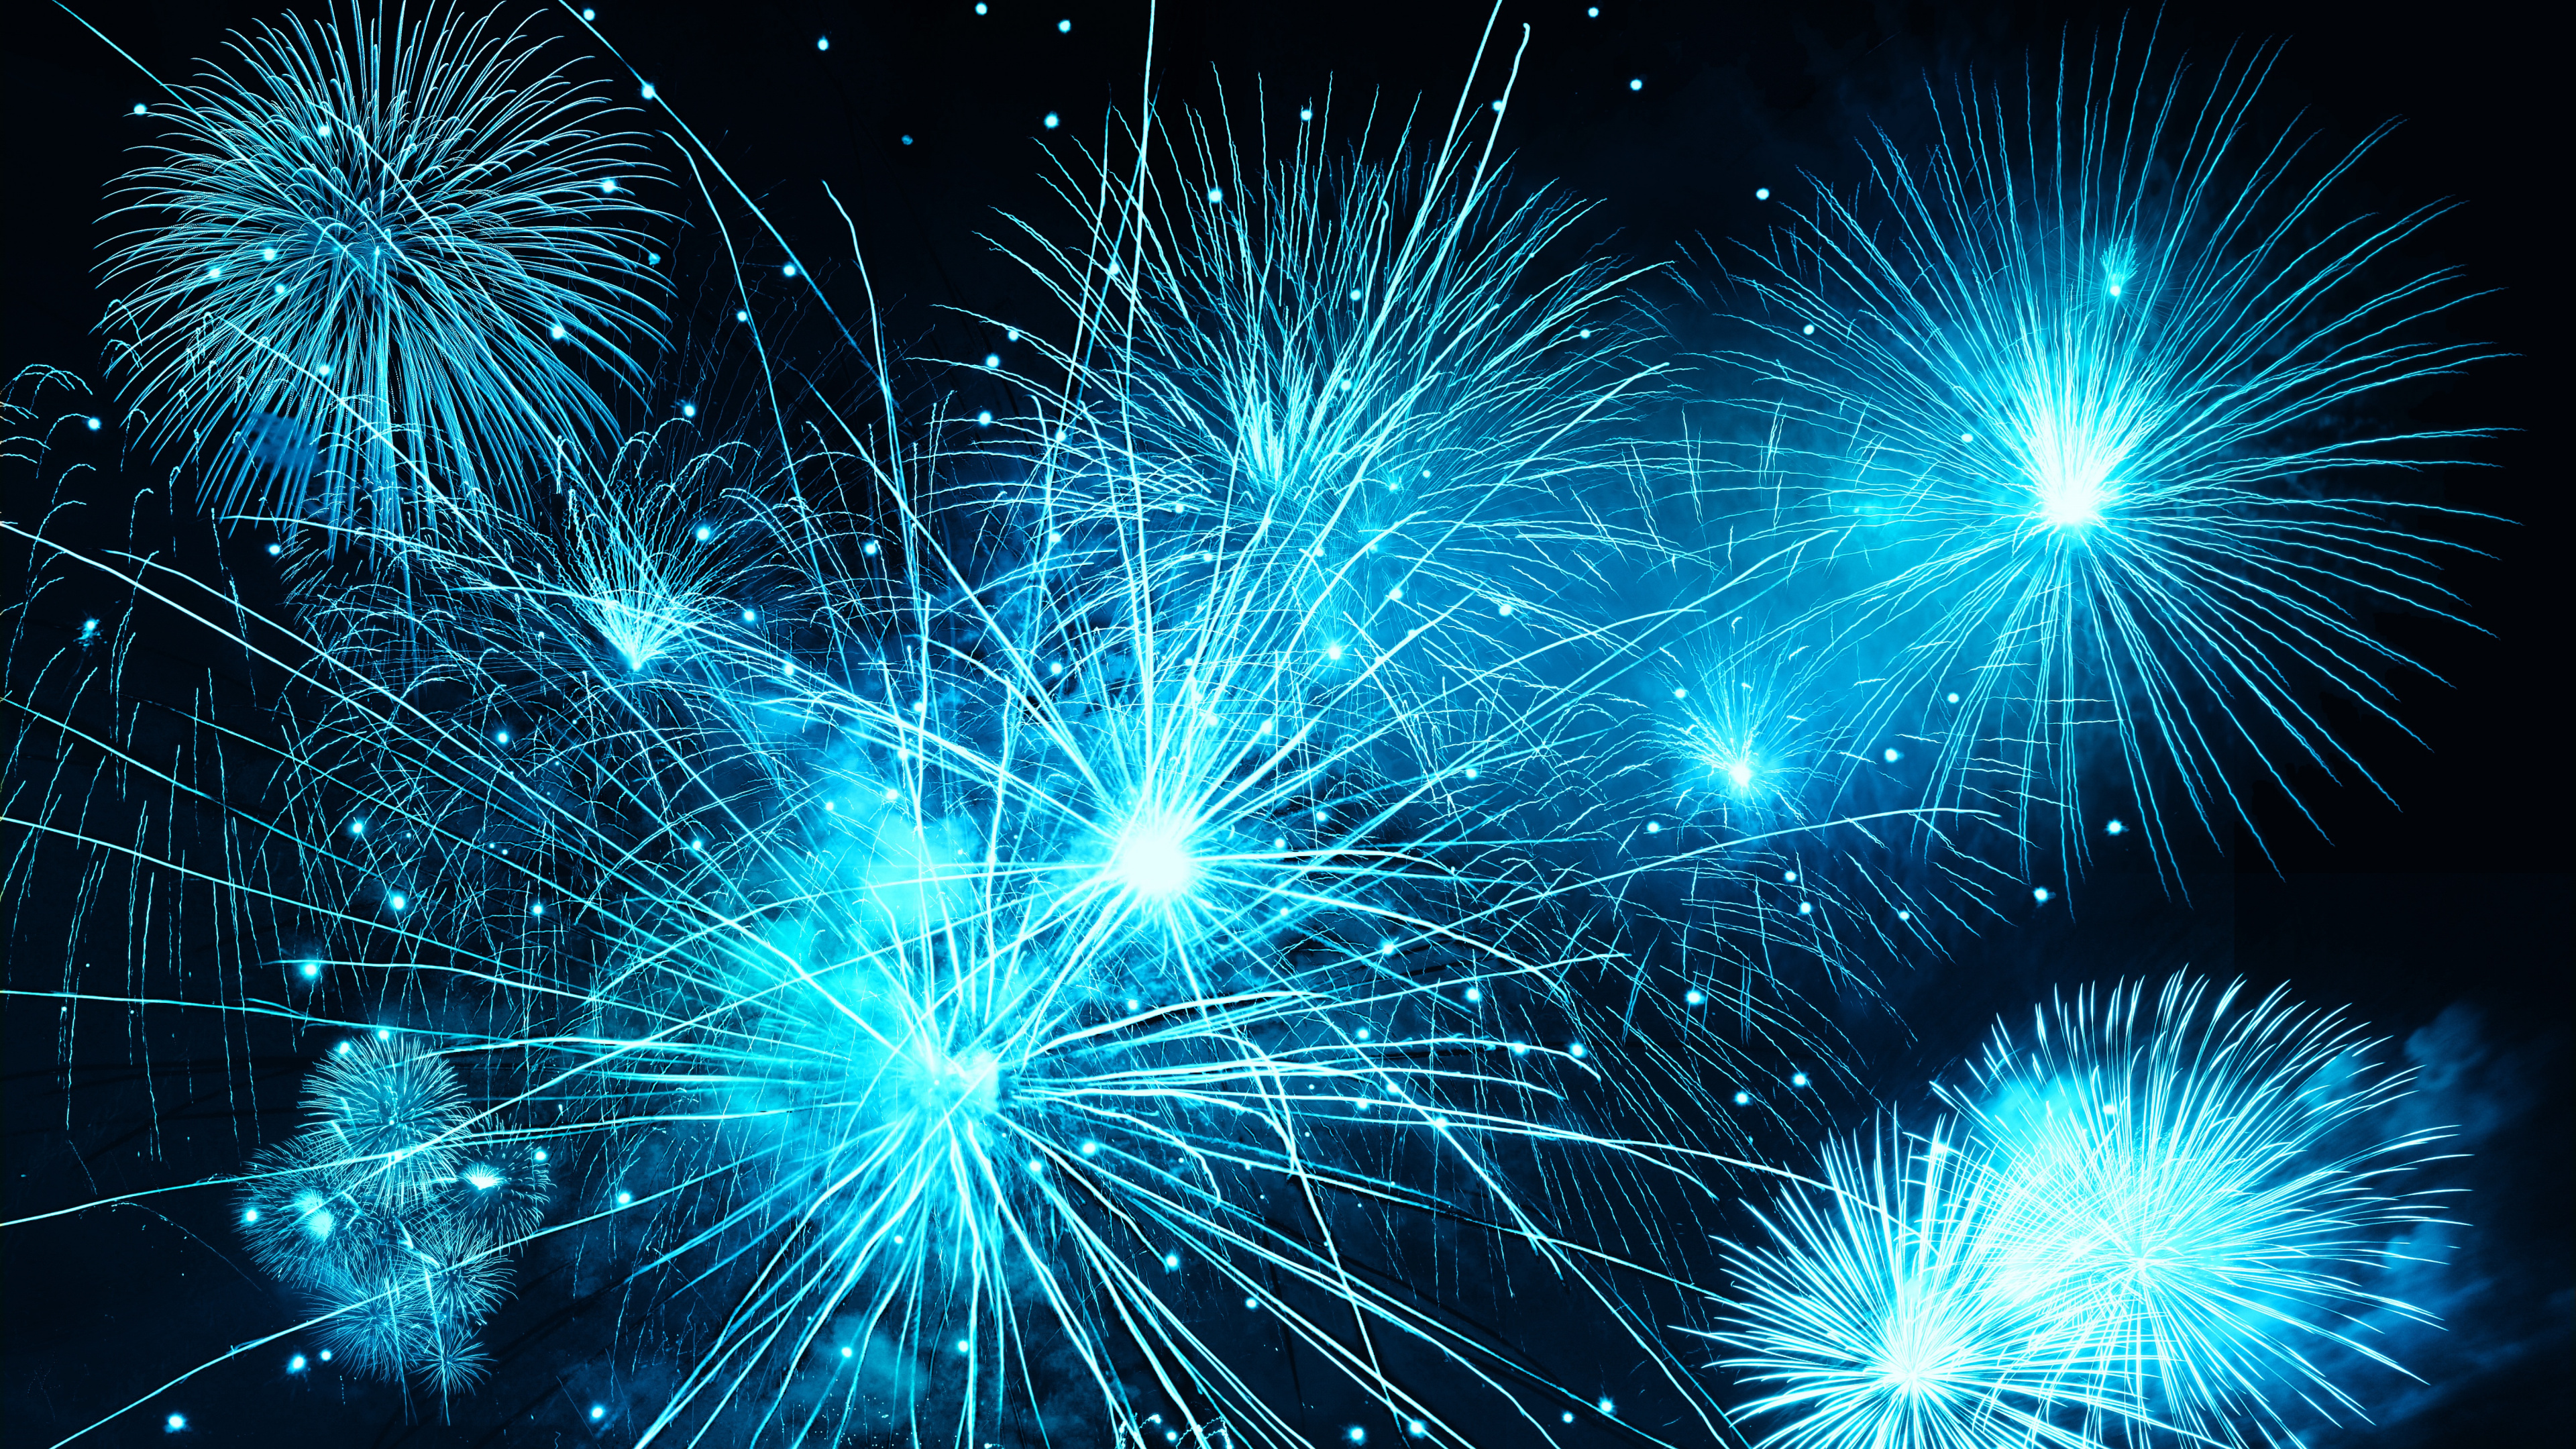 New Years Eve, New Year, New Years Day, Party, Fireworks. Wallpaper in 3840x2160 Resolution